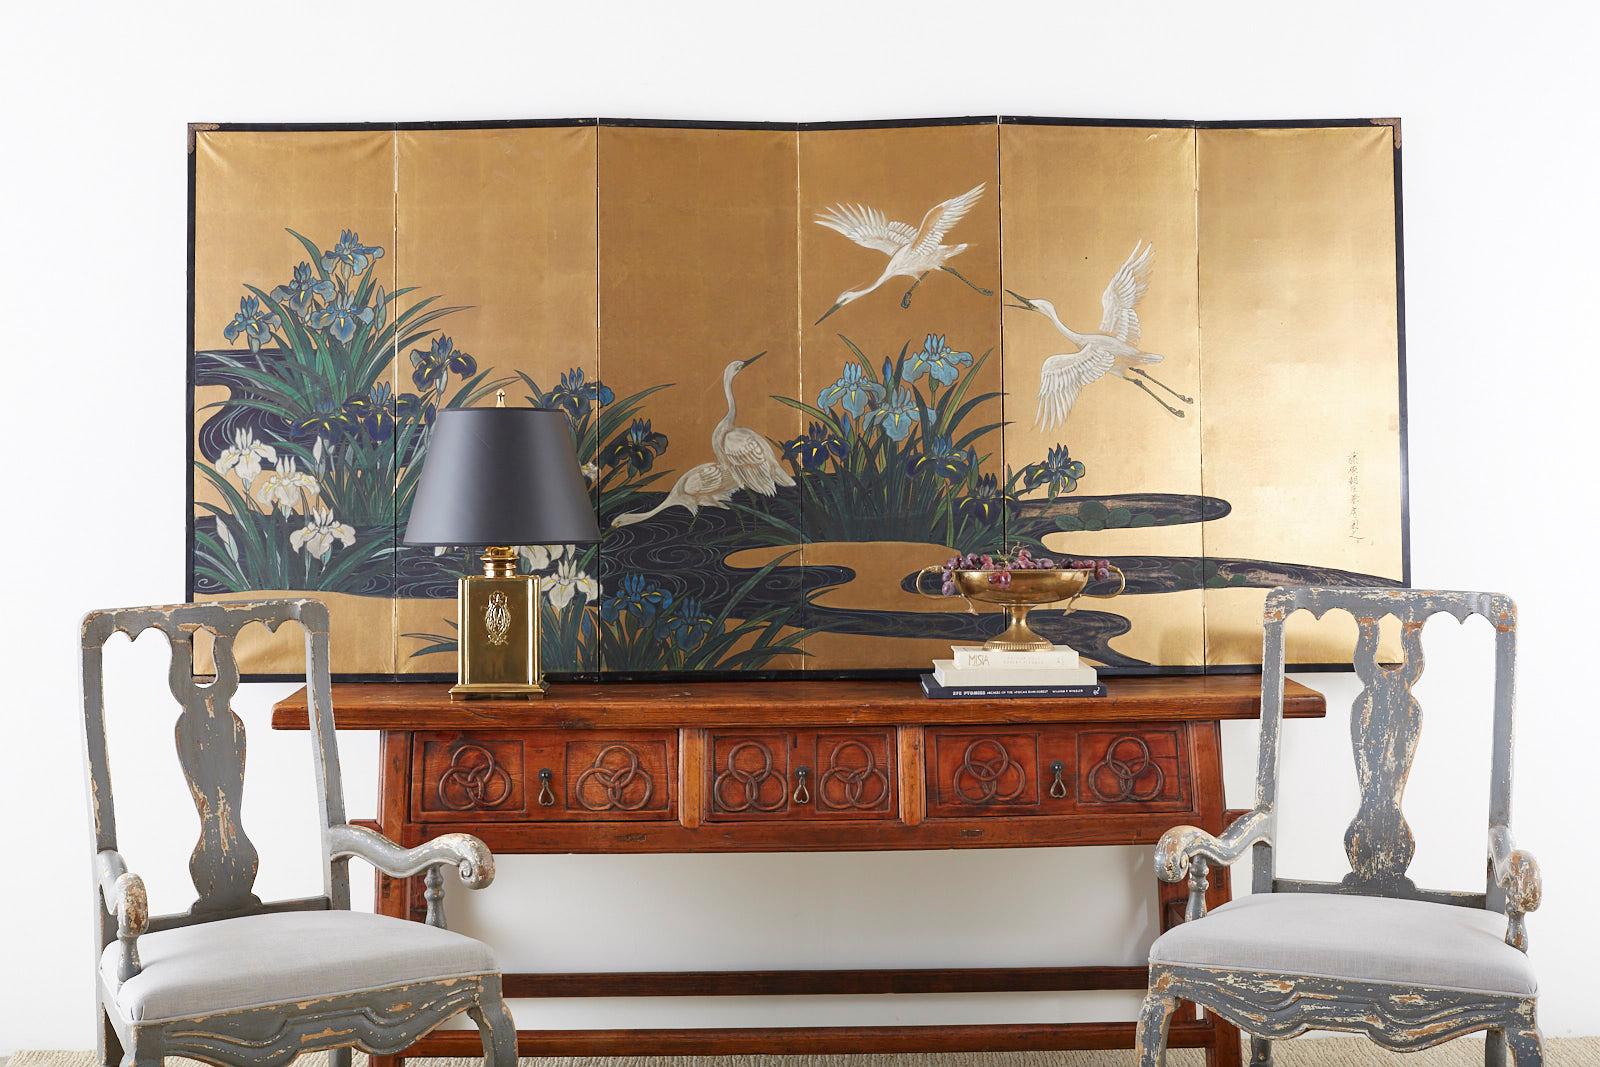 Captivating Japanese six-panel late Meiji/early Taisho Showa period screen featuring five egrets or herons in a water landscape. Painted with vibrant colored pigments over gold leaf squares with a rich, aged patina. The painting is signed on the